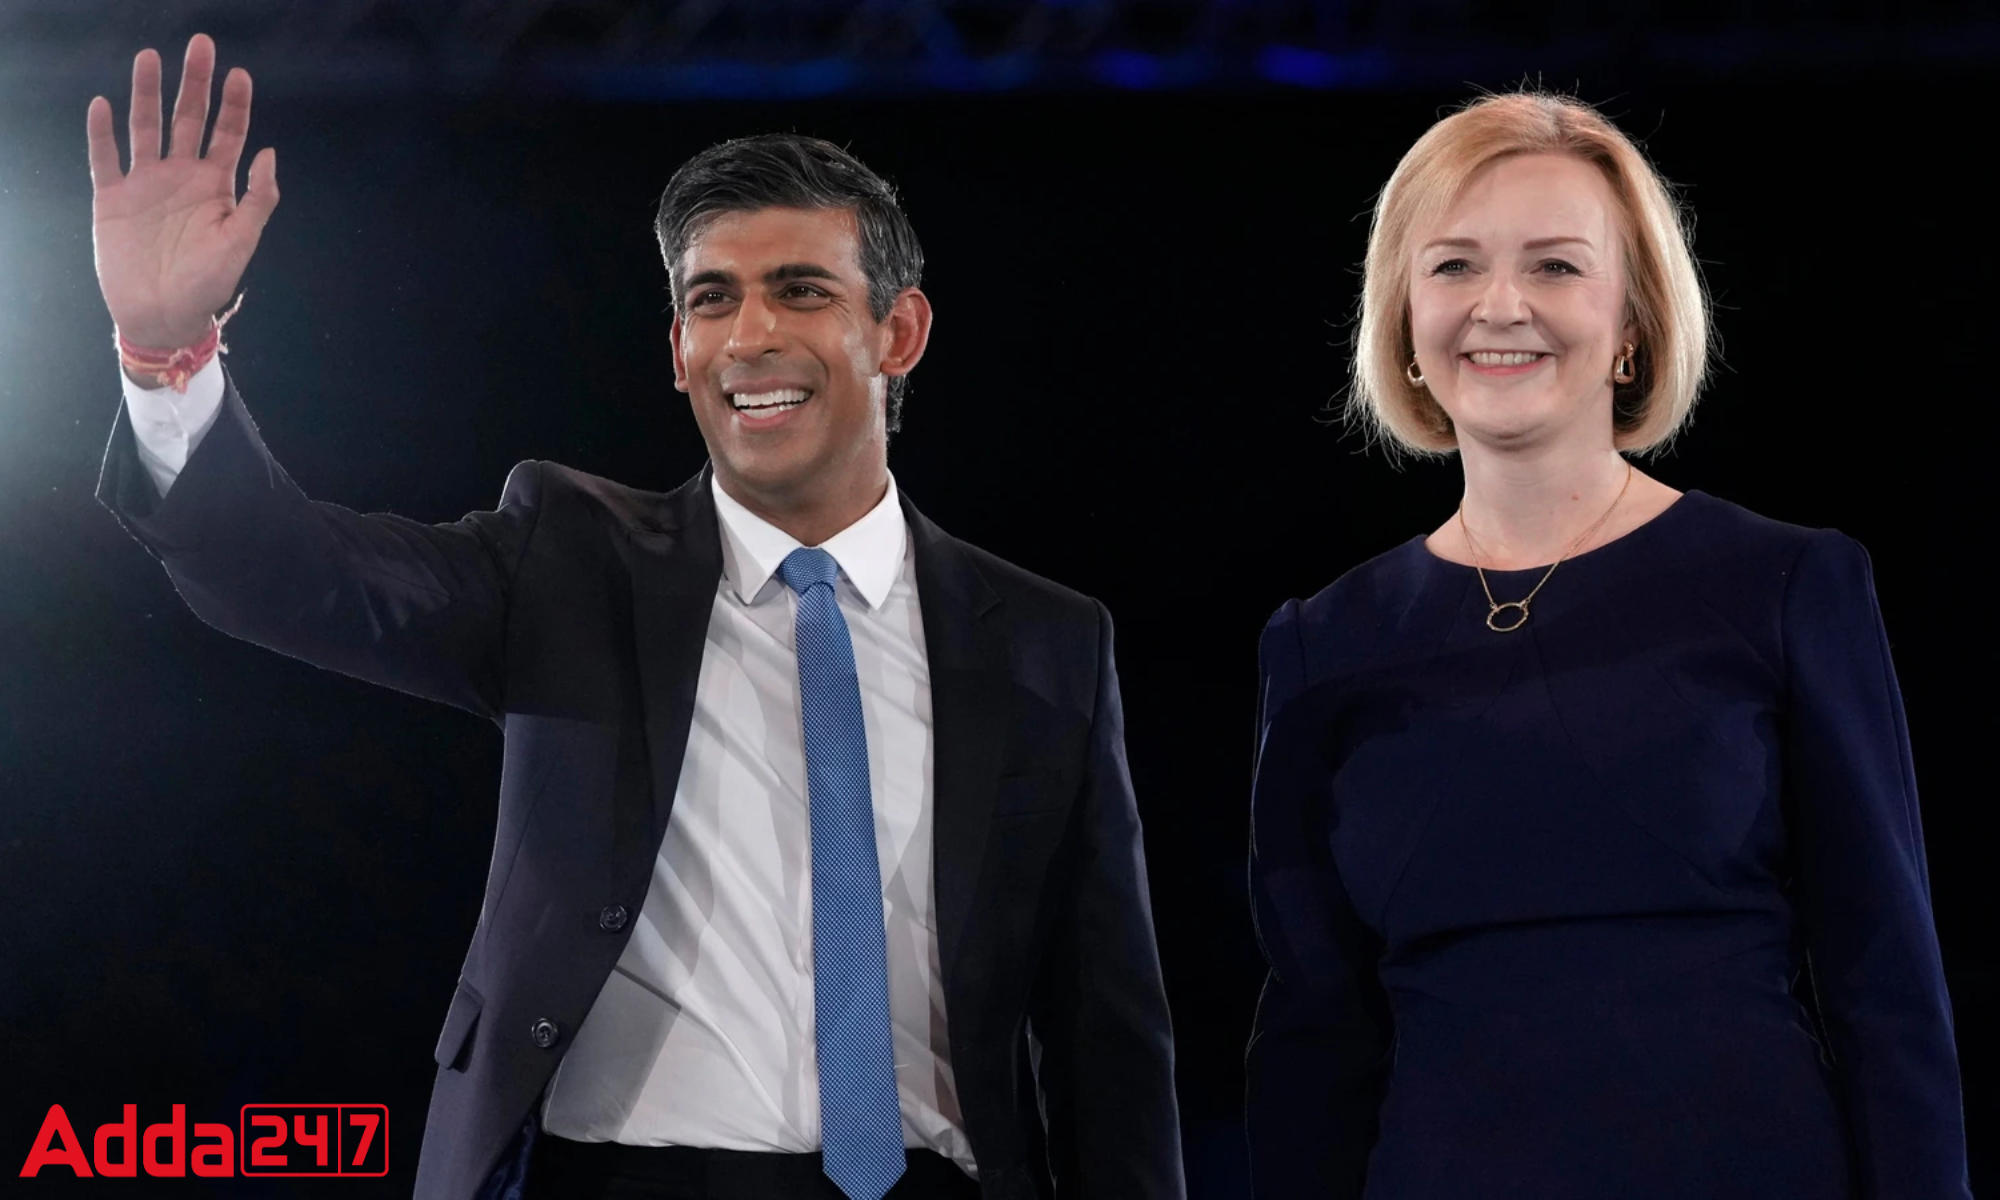 Rishi Sunak lost to Liz Truss, who takes over as UK's new prime minister_40.1